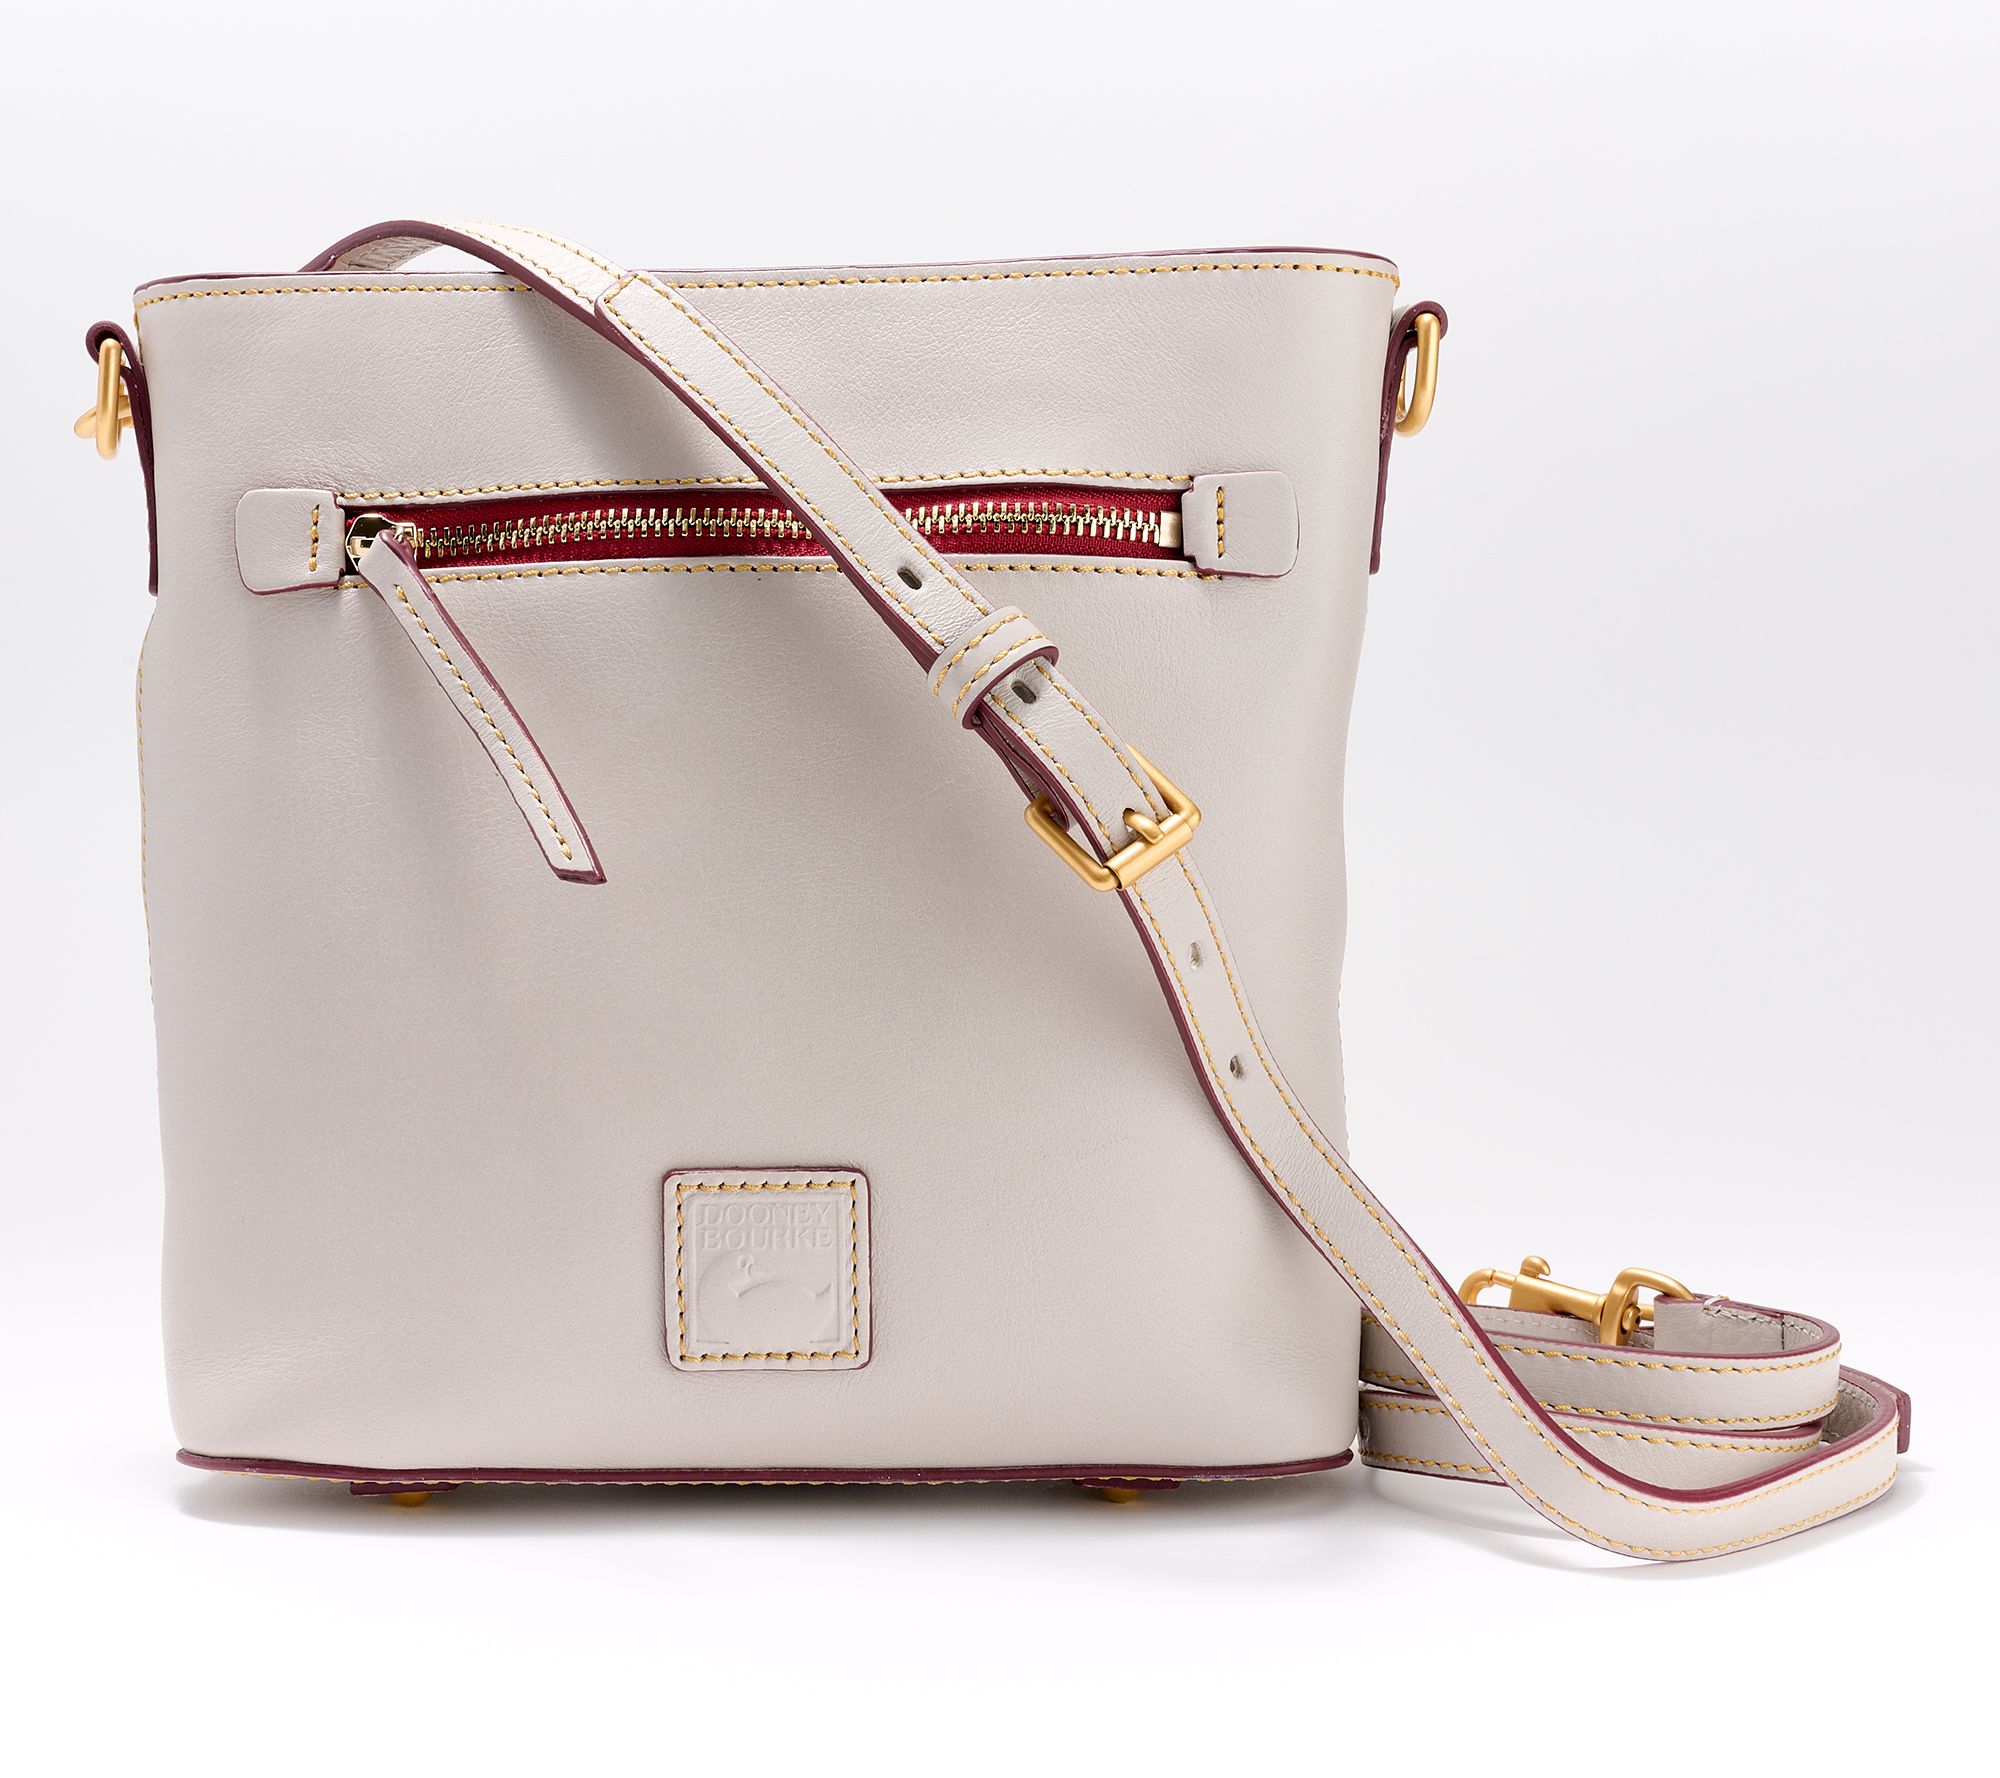 Dooney & Bourke Denison Serena Crossbody with Pouch on QVC 